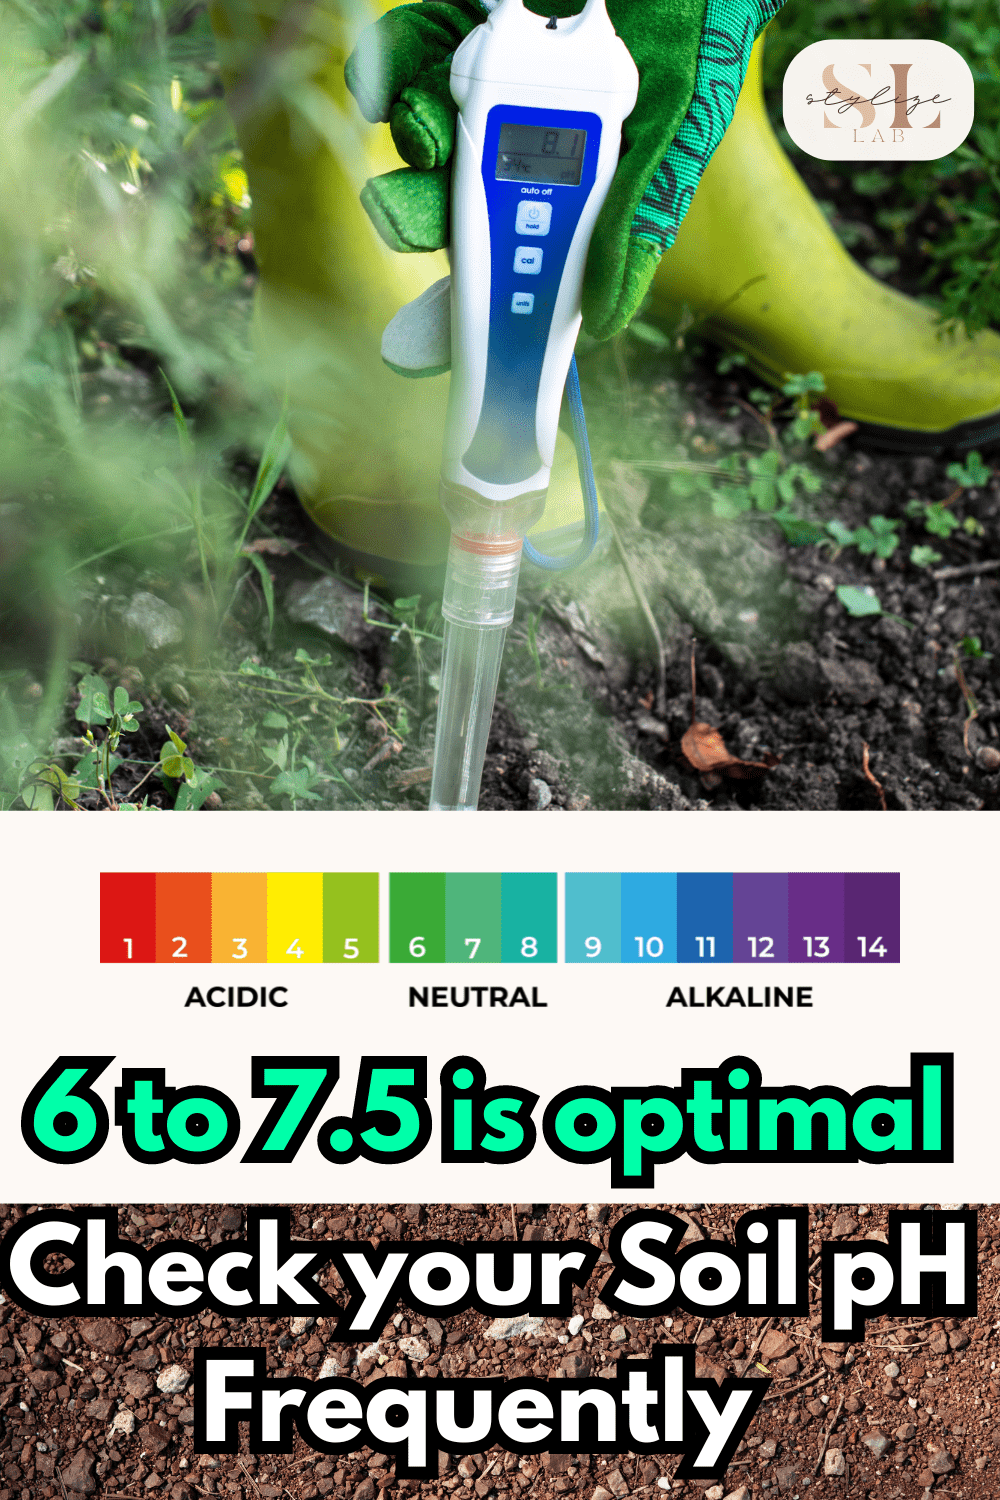 Check your Soil pH Frequently , 6 to 7.5 is optimal pH soil